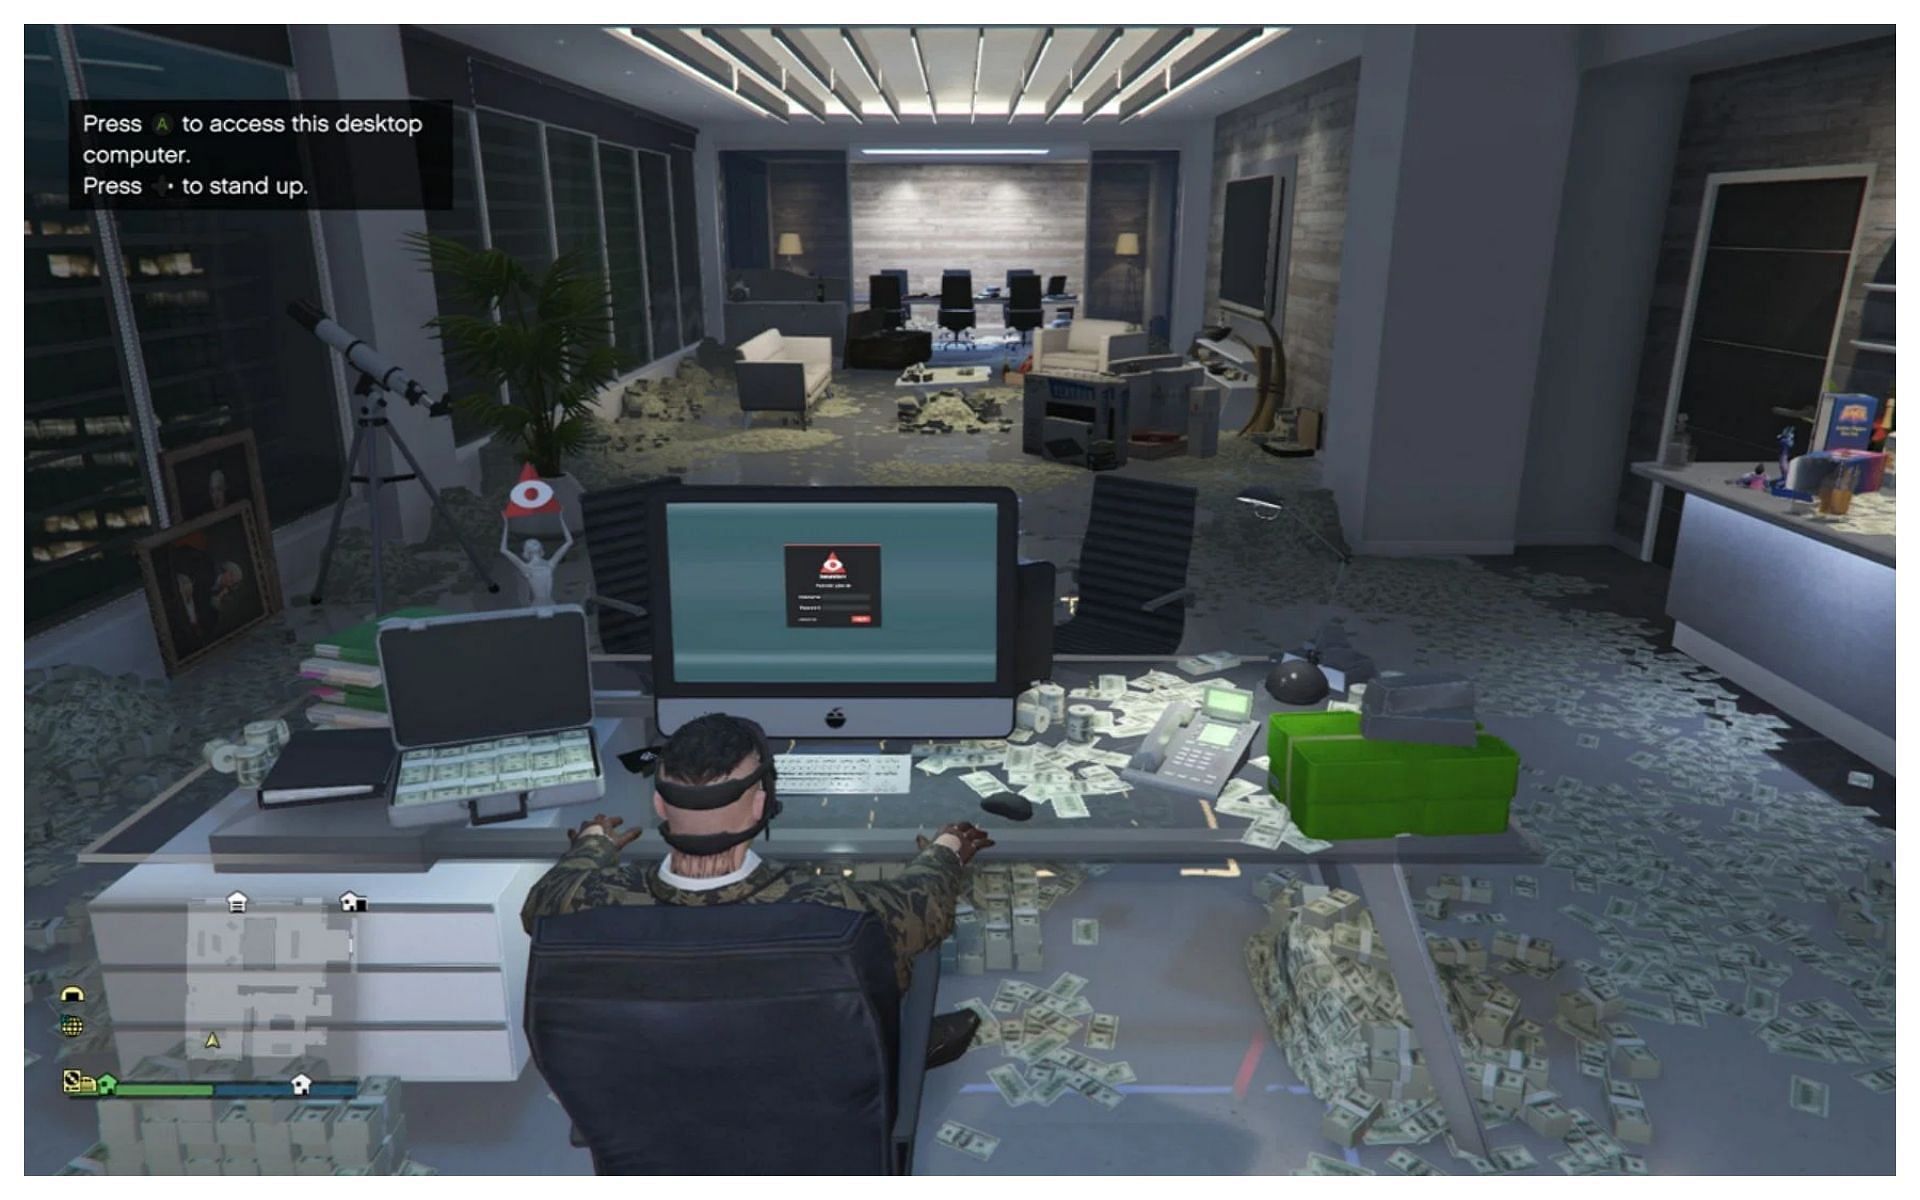 Millions to be made as an Executive in GTA Online (Image via Sportskeeda)